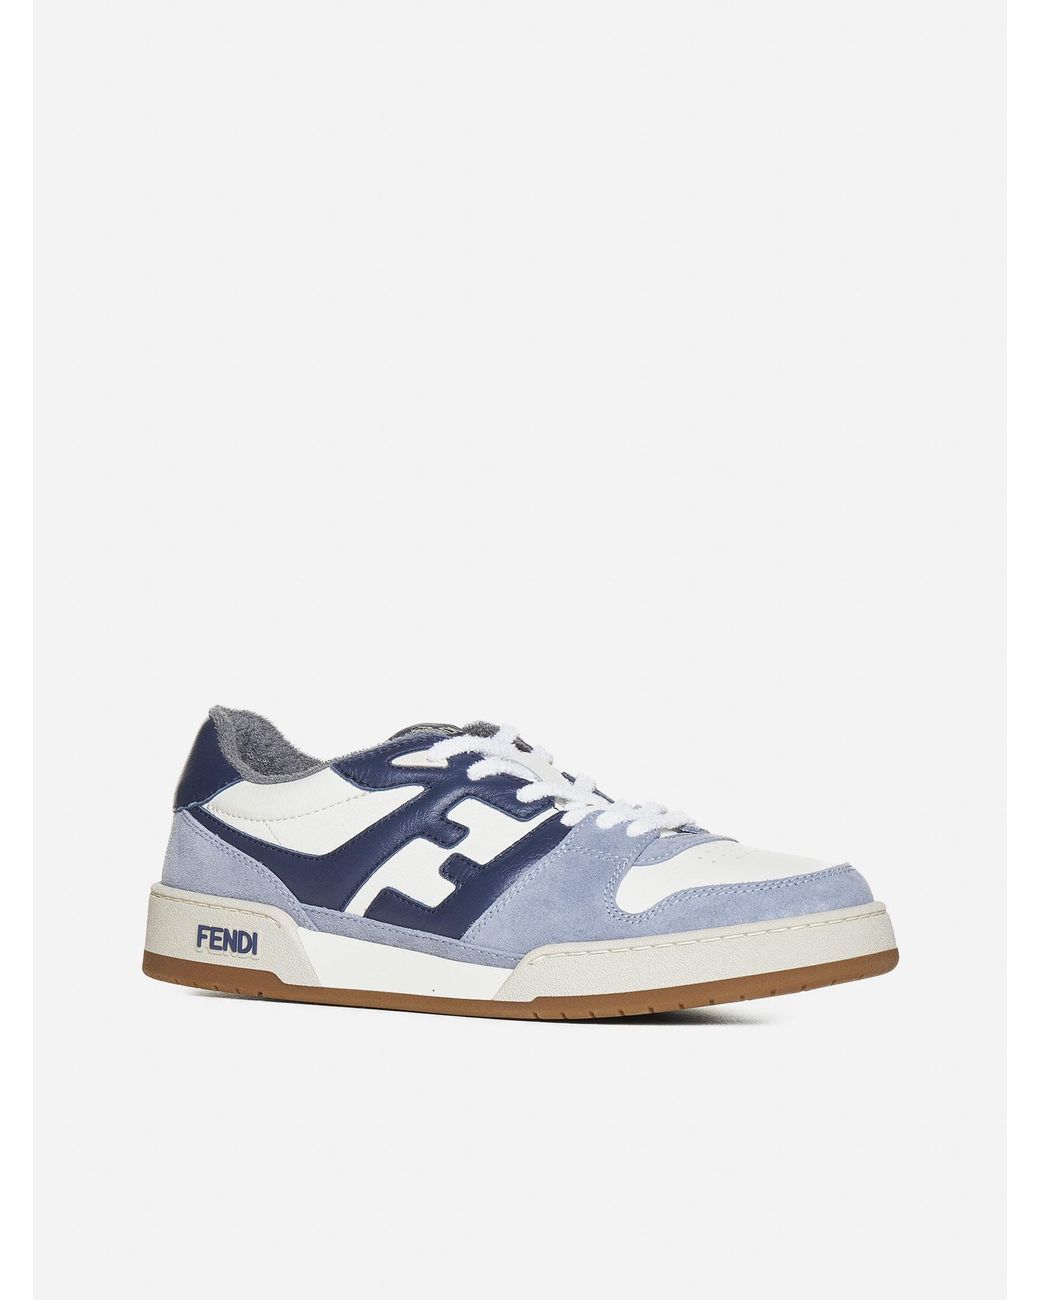 Fendi Match Leather And Suede Sneakers in Blue for Men | Lyst UK